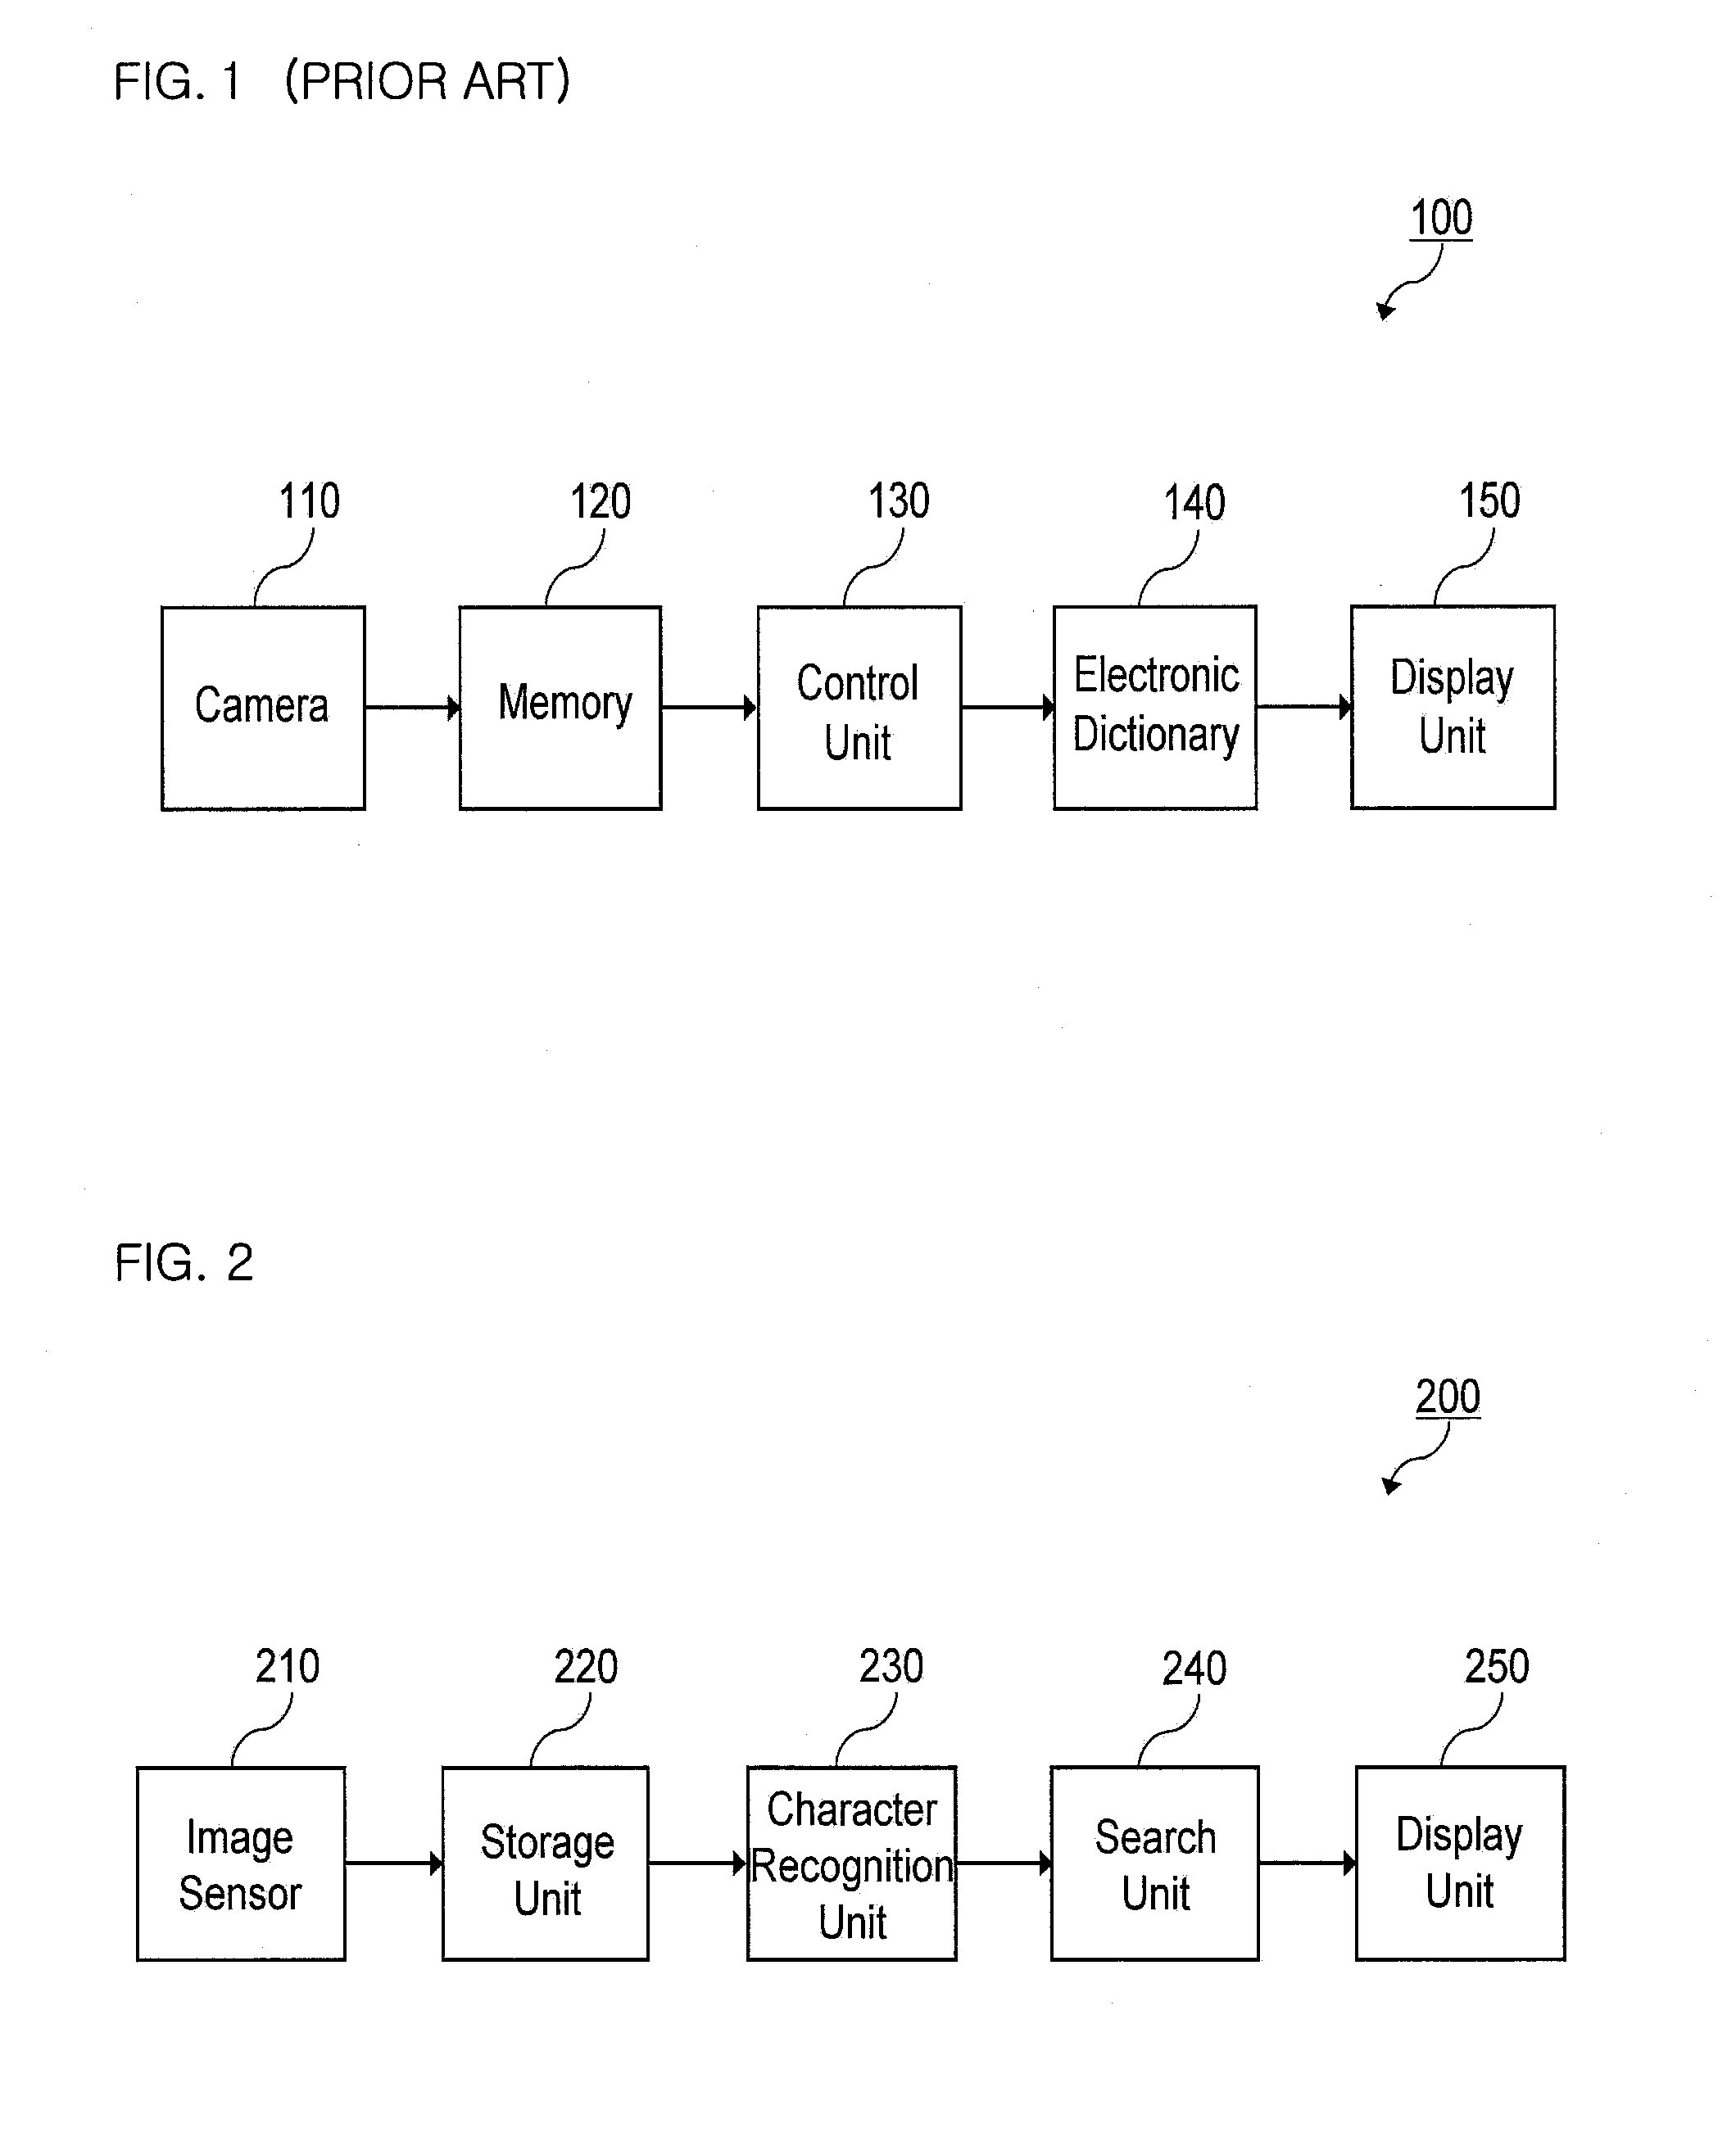 Image sensor and image sensing method for character recognition